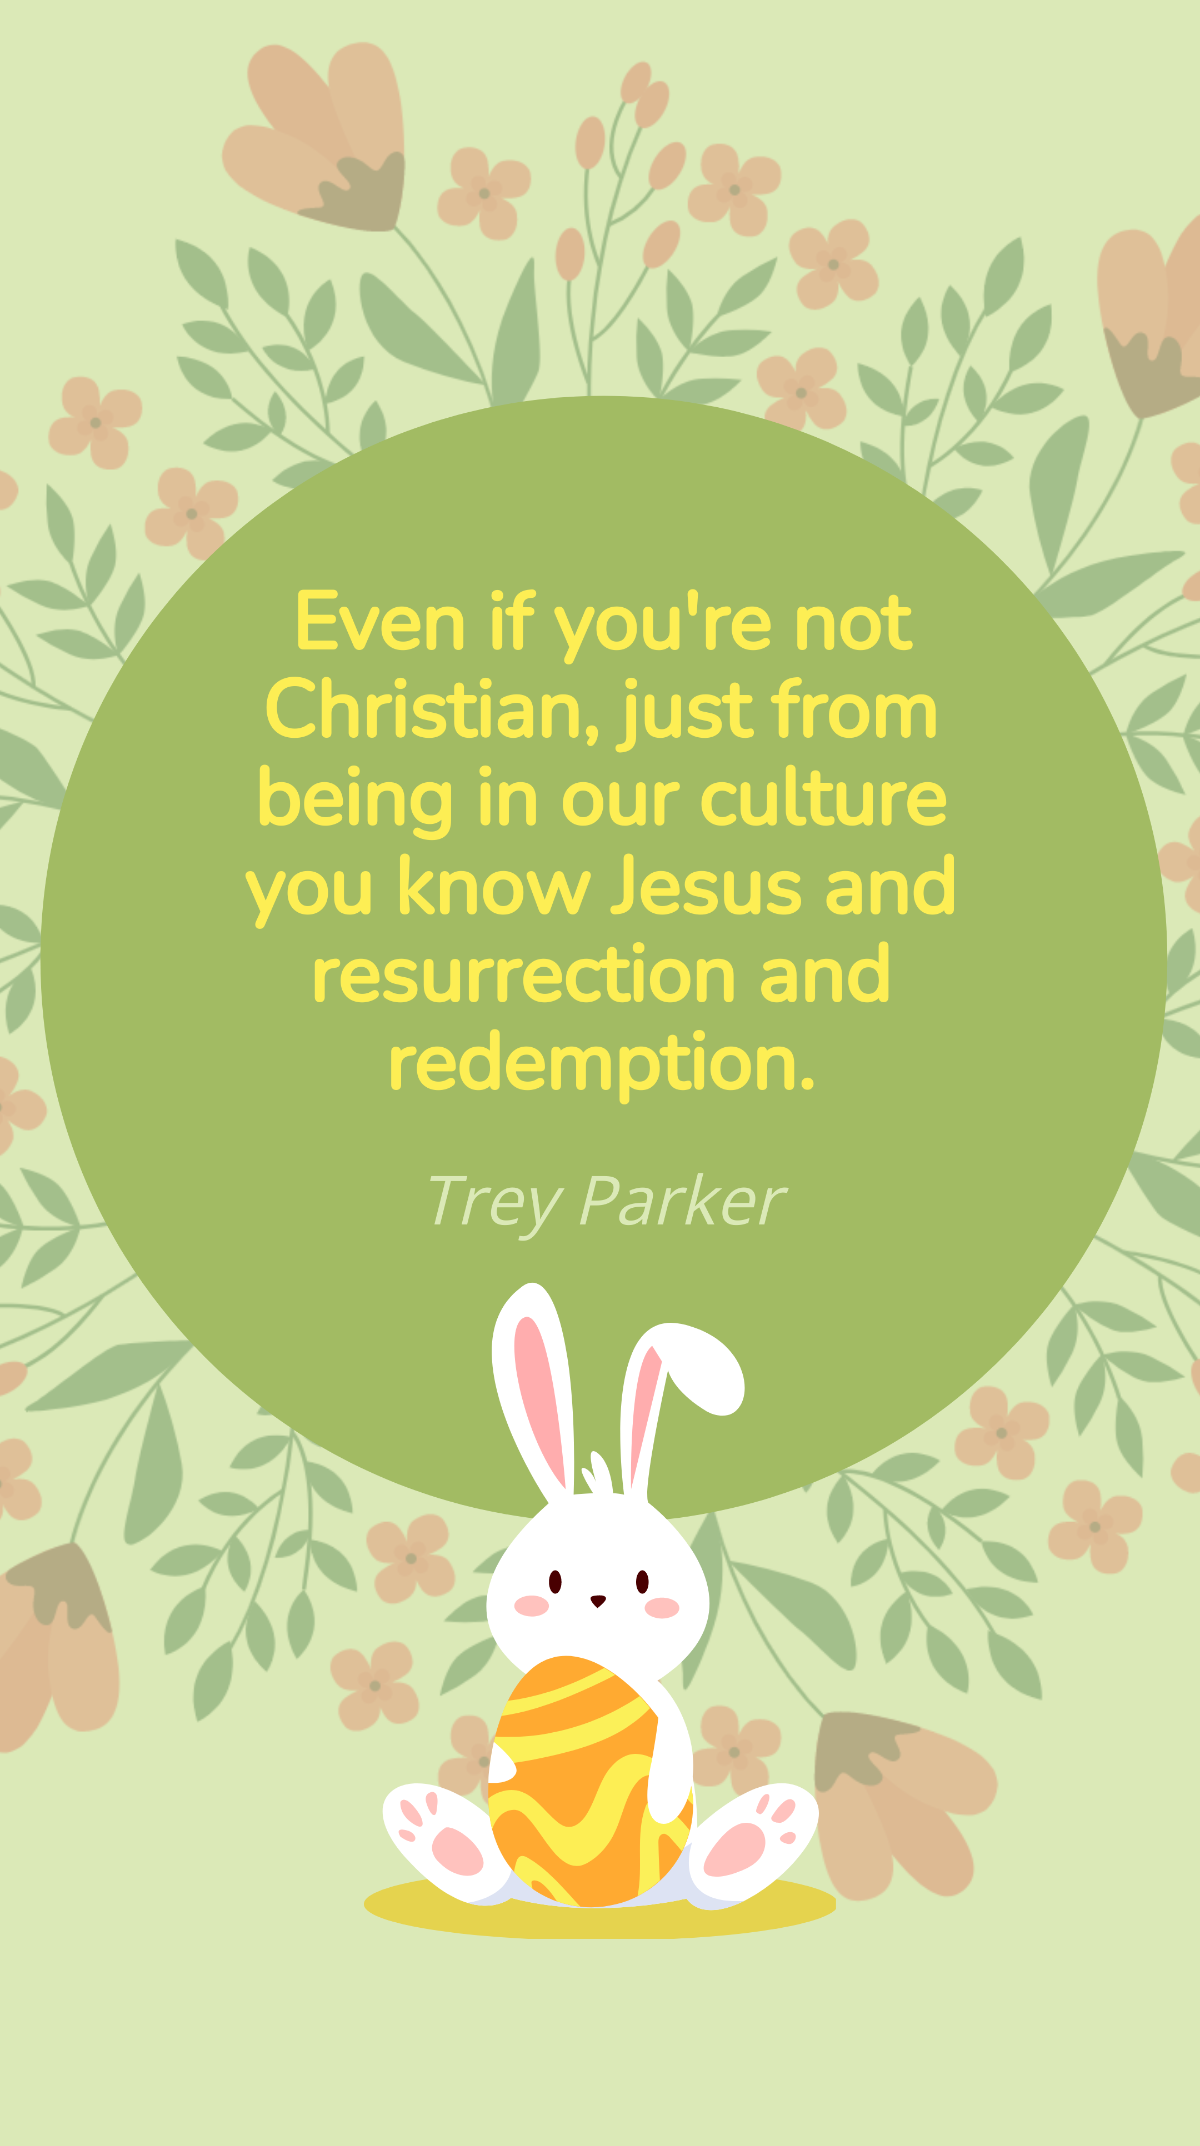 Trey Parker - Even if you're not Christian, just from being in our culture you know Jesus and resurrection and redemption. Template